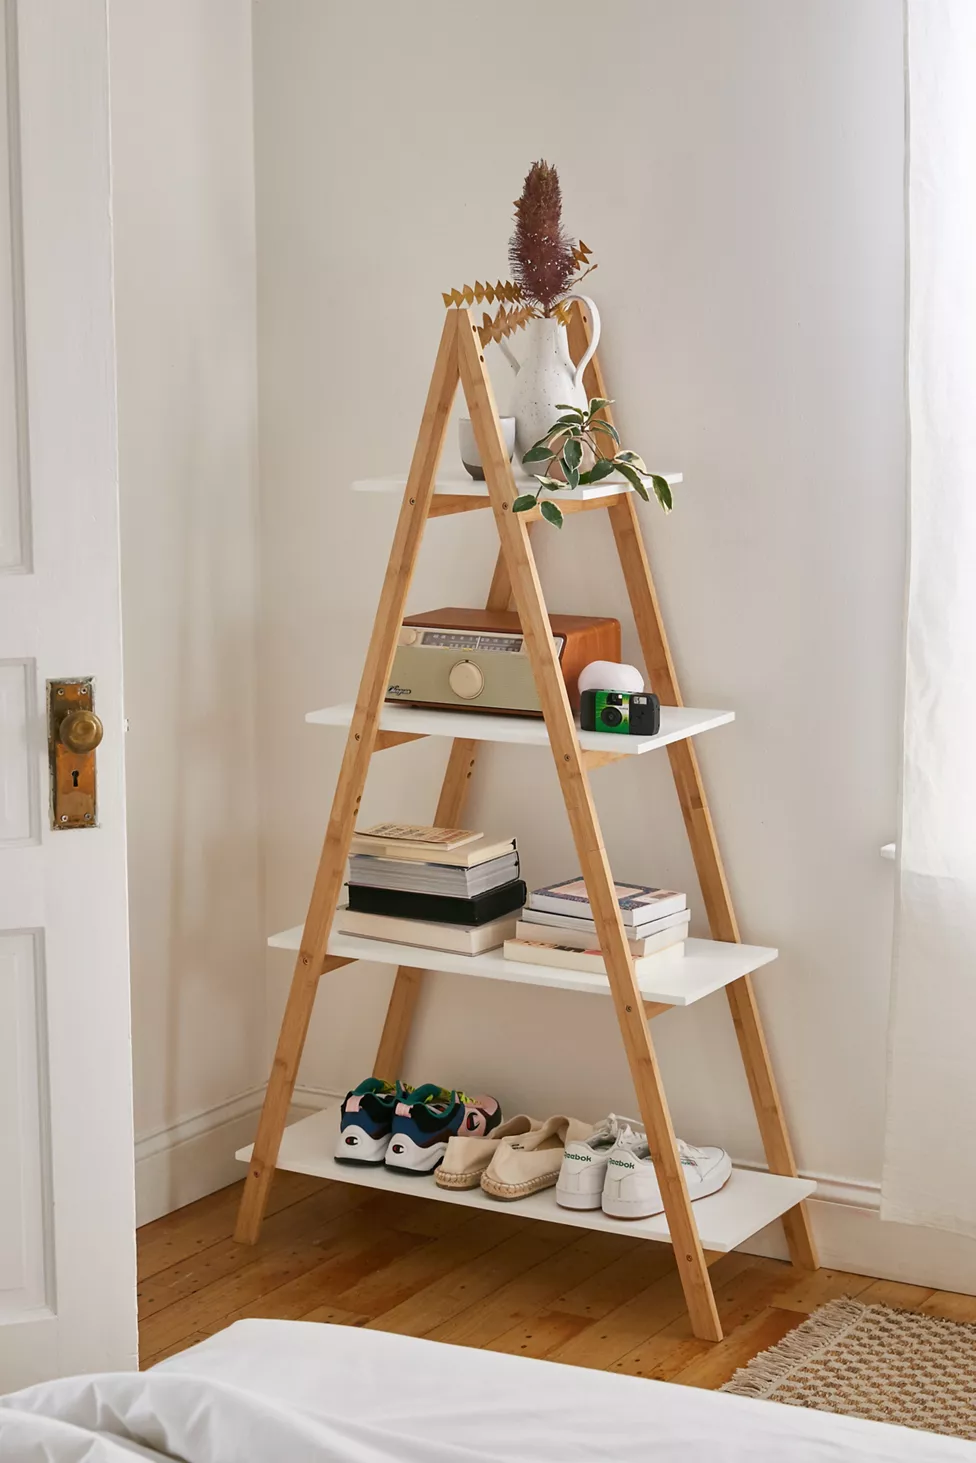 Bring Style to Your Space with a Triangle Shelf